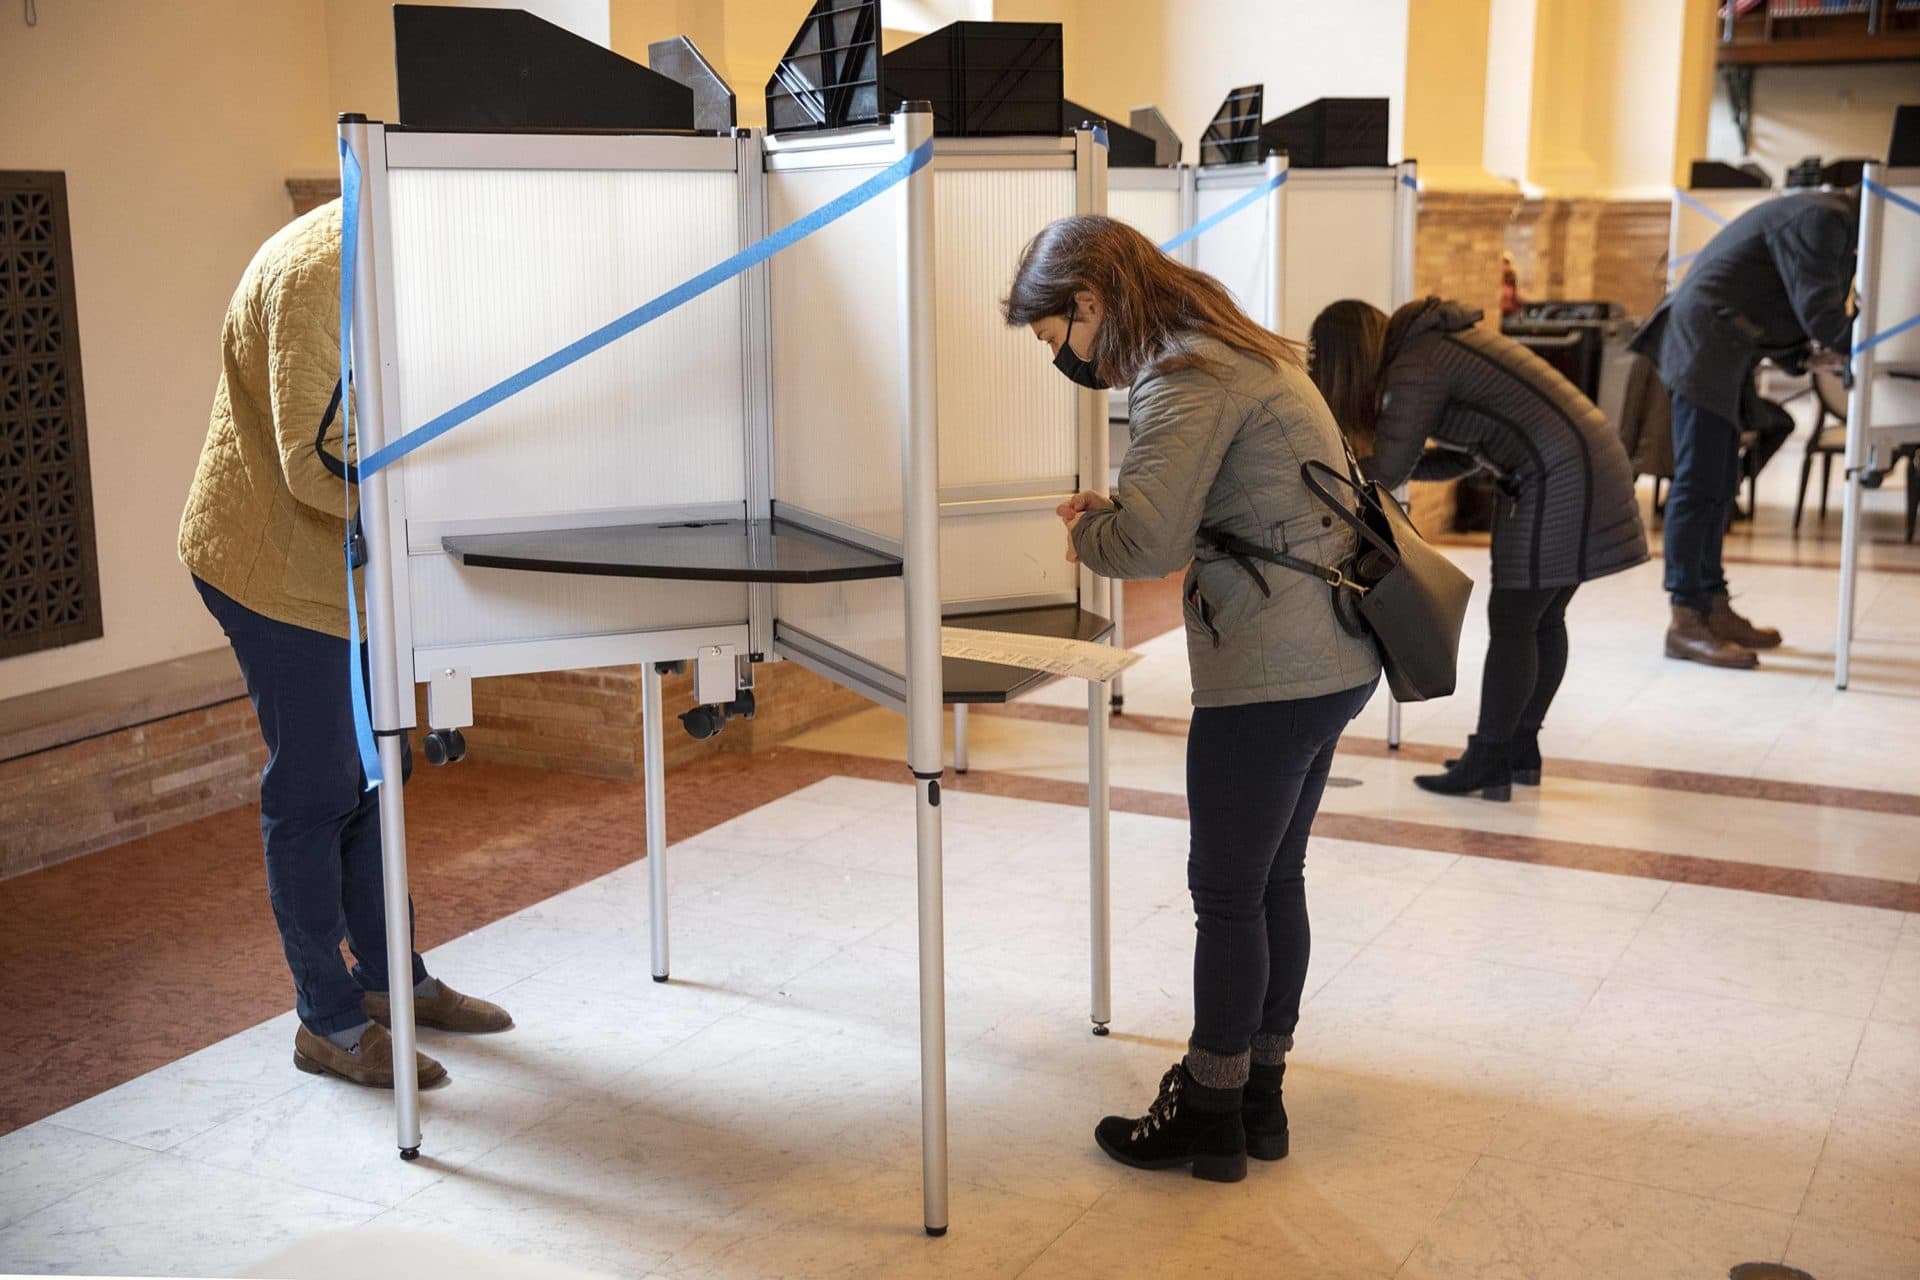 Voters fill the booths at the Boston Public Library. (Robin Lubbock/WBUR)